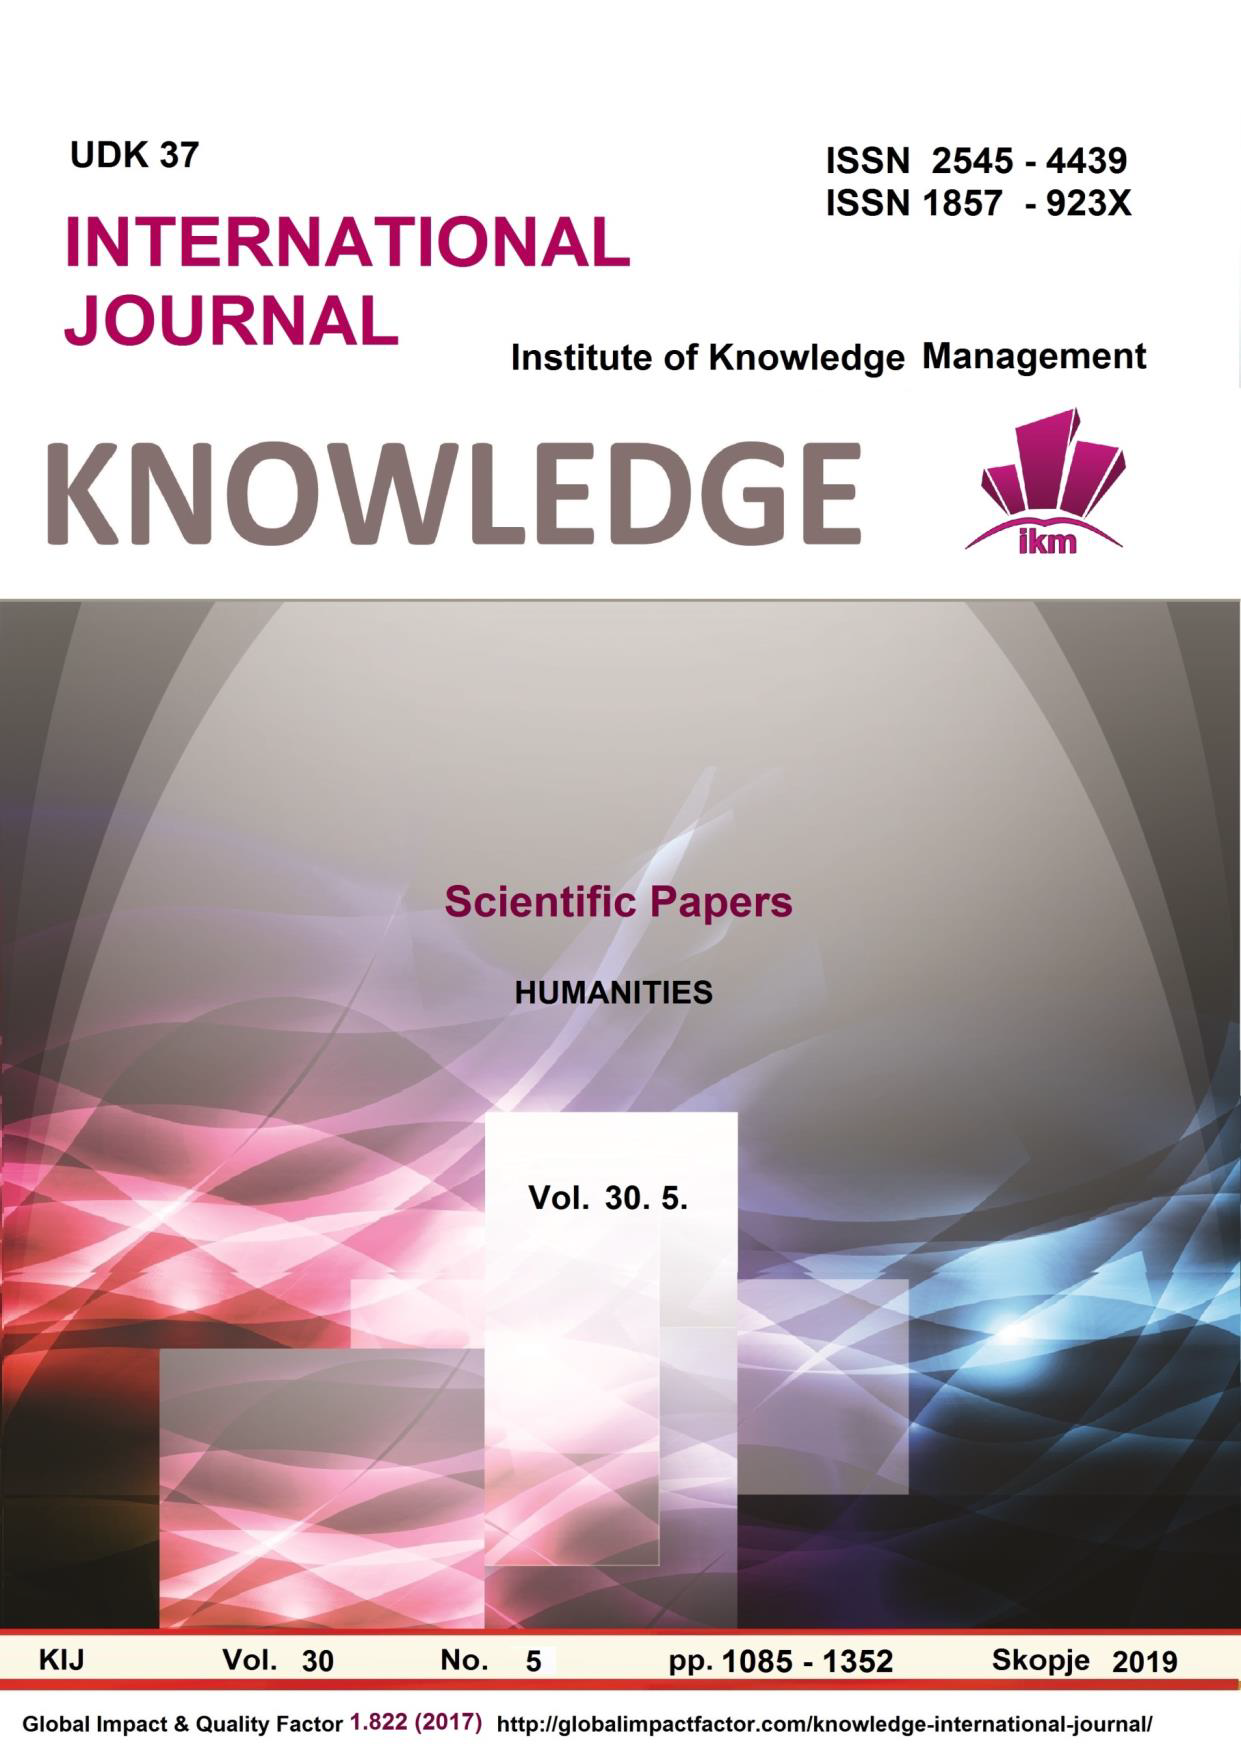 					View Vol. 30 No. 6 (2019): Knowledge without borders
				